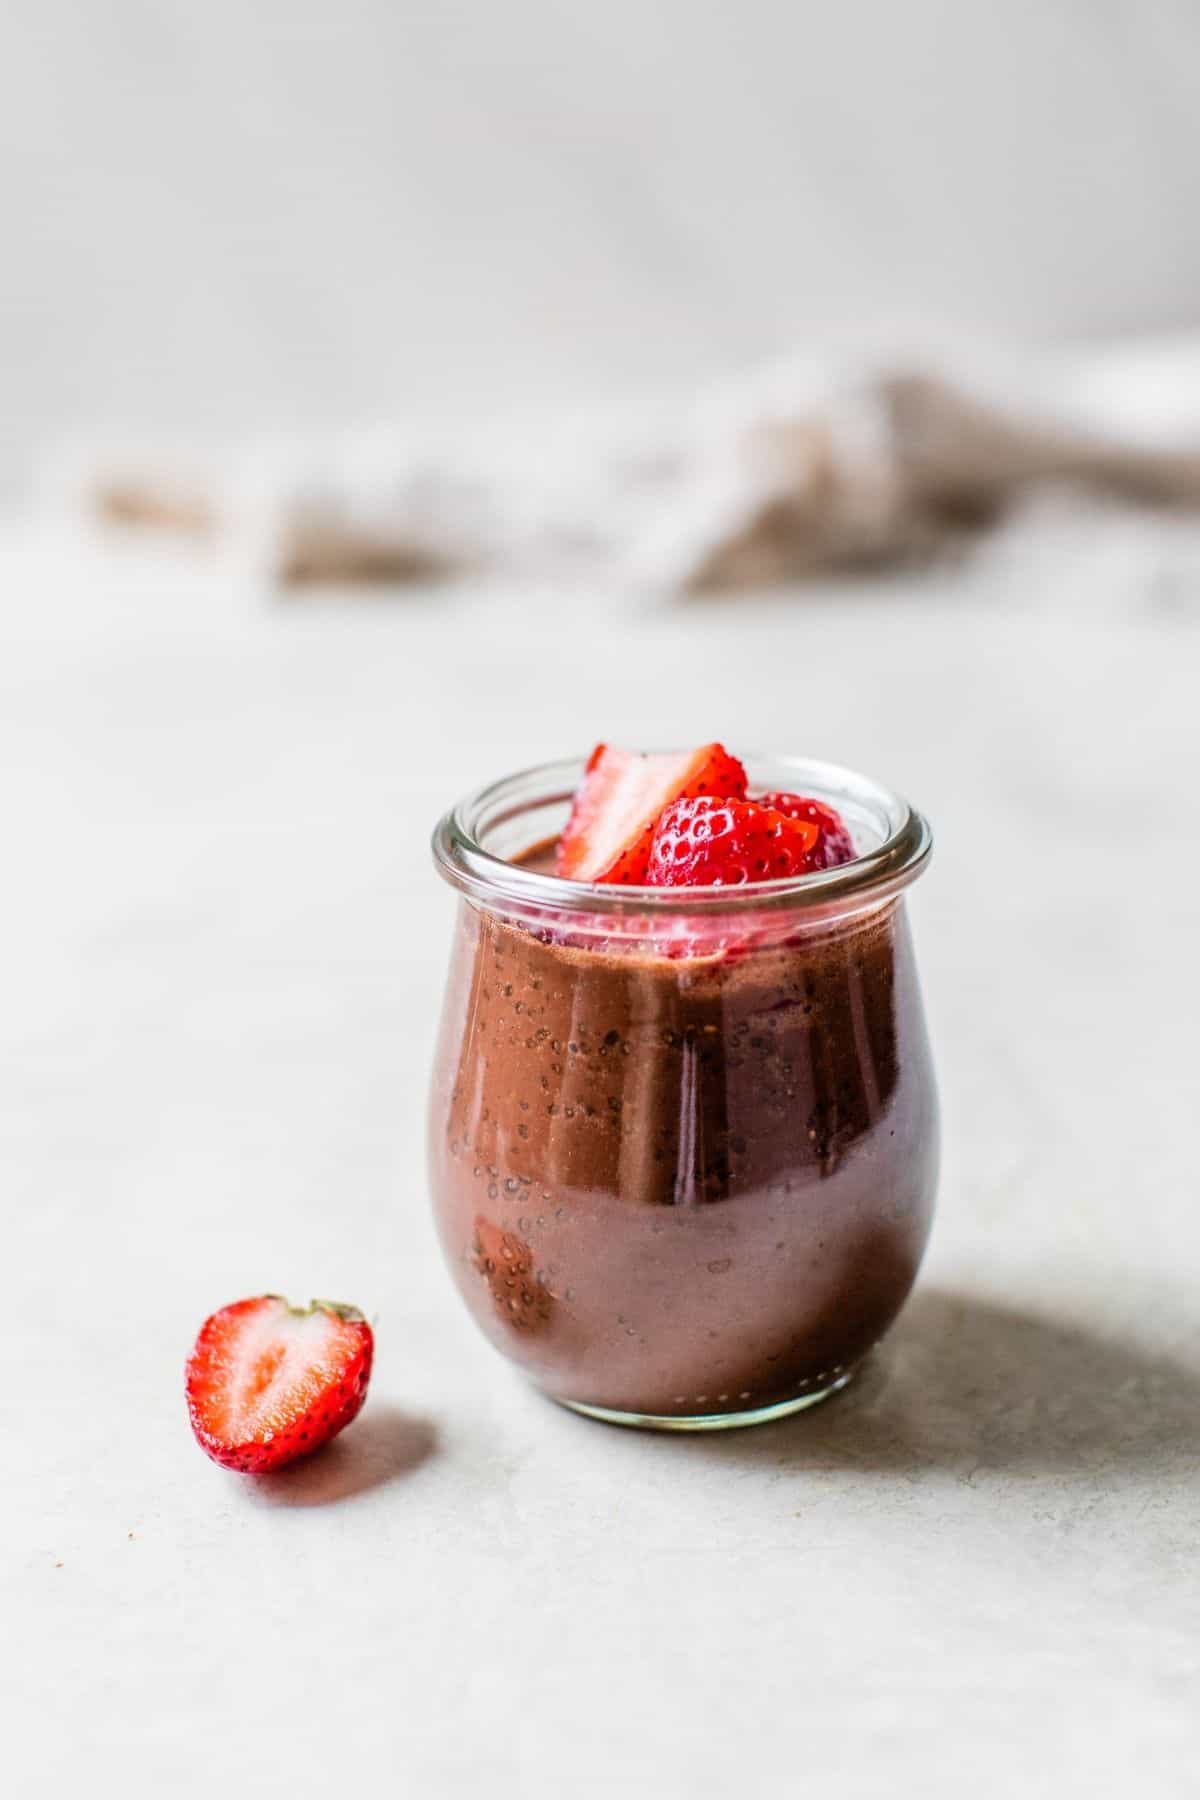 chocolate chia seed pudding topped with strawberries